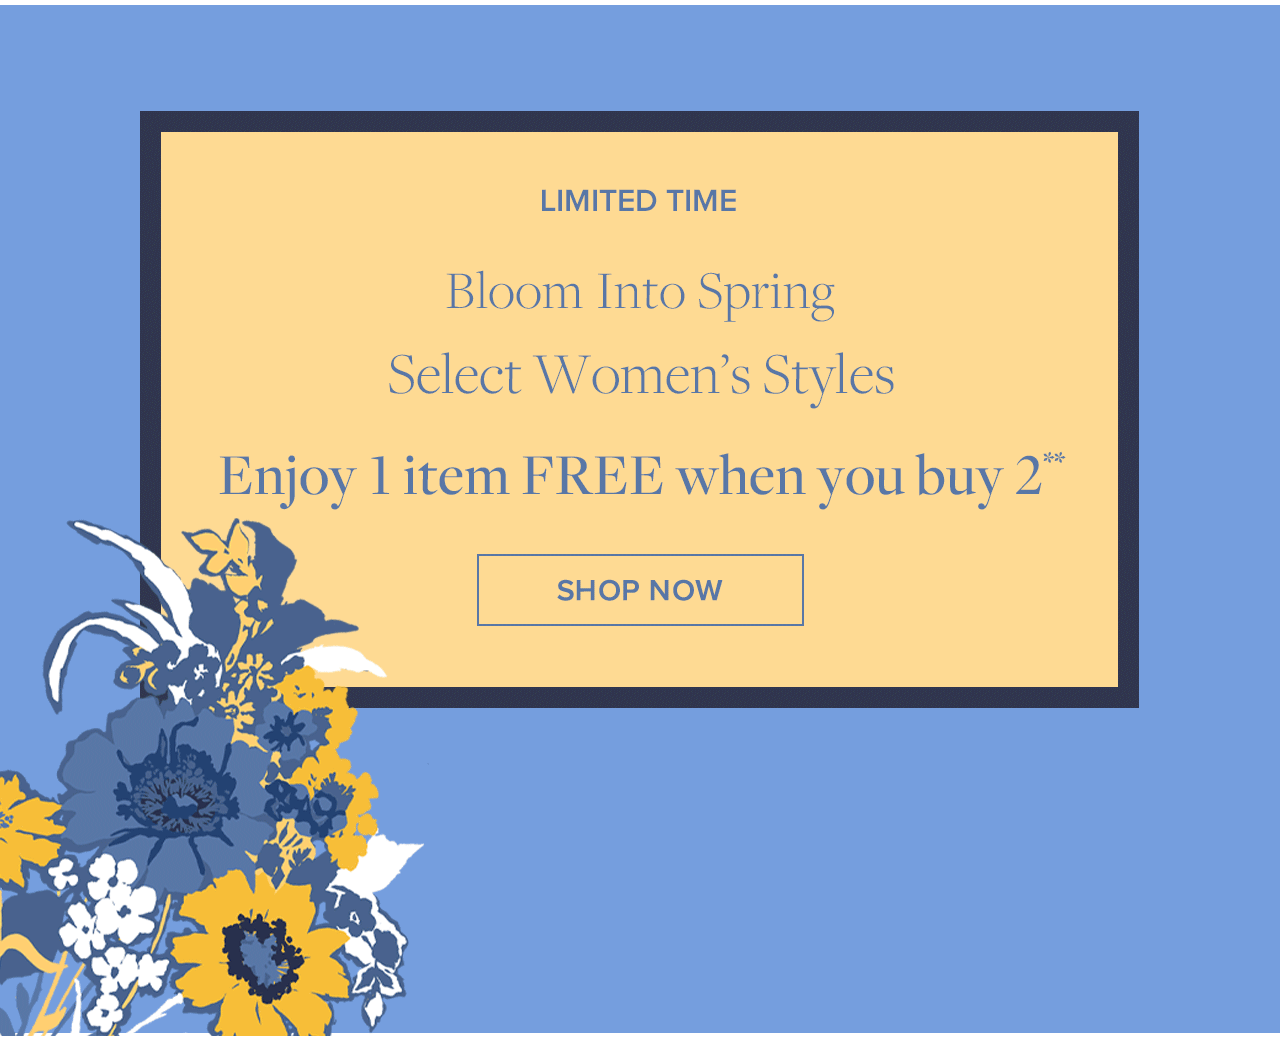 Limited Time Bloom Into Spring Select Women's Styles Enjoy 1 item Free When you buy 2 Shop Now